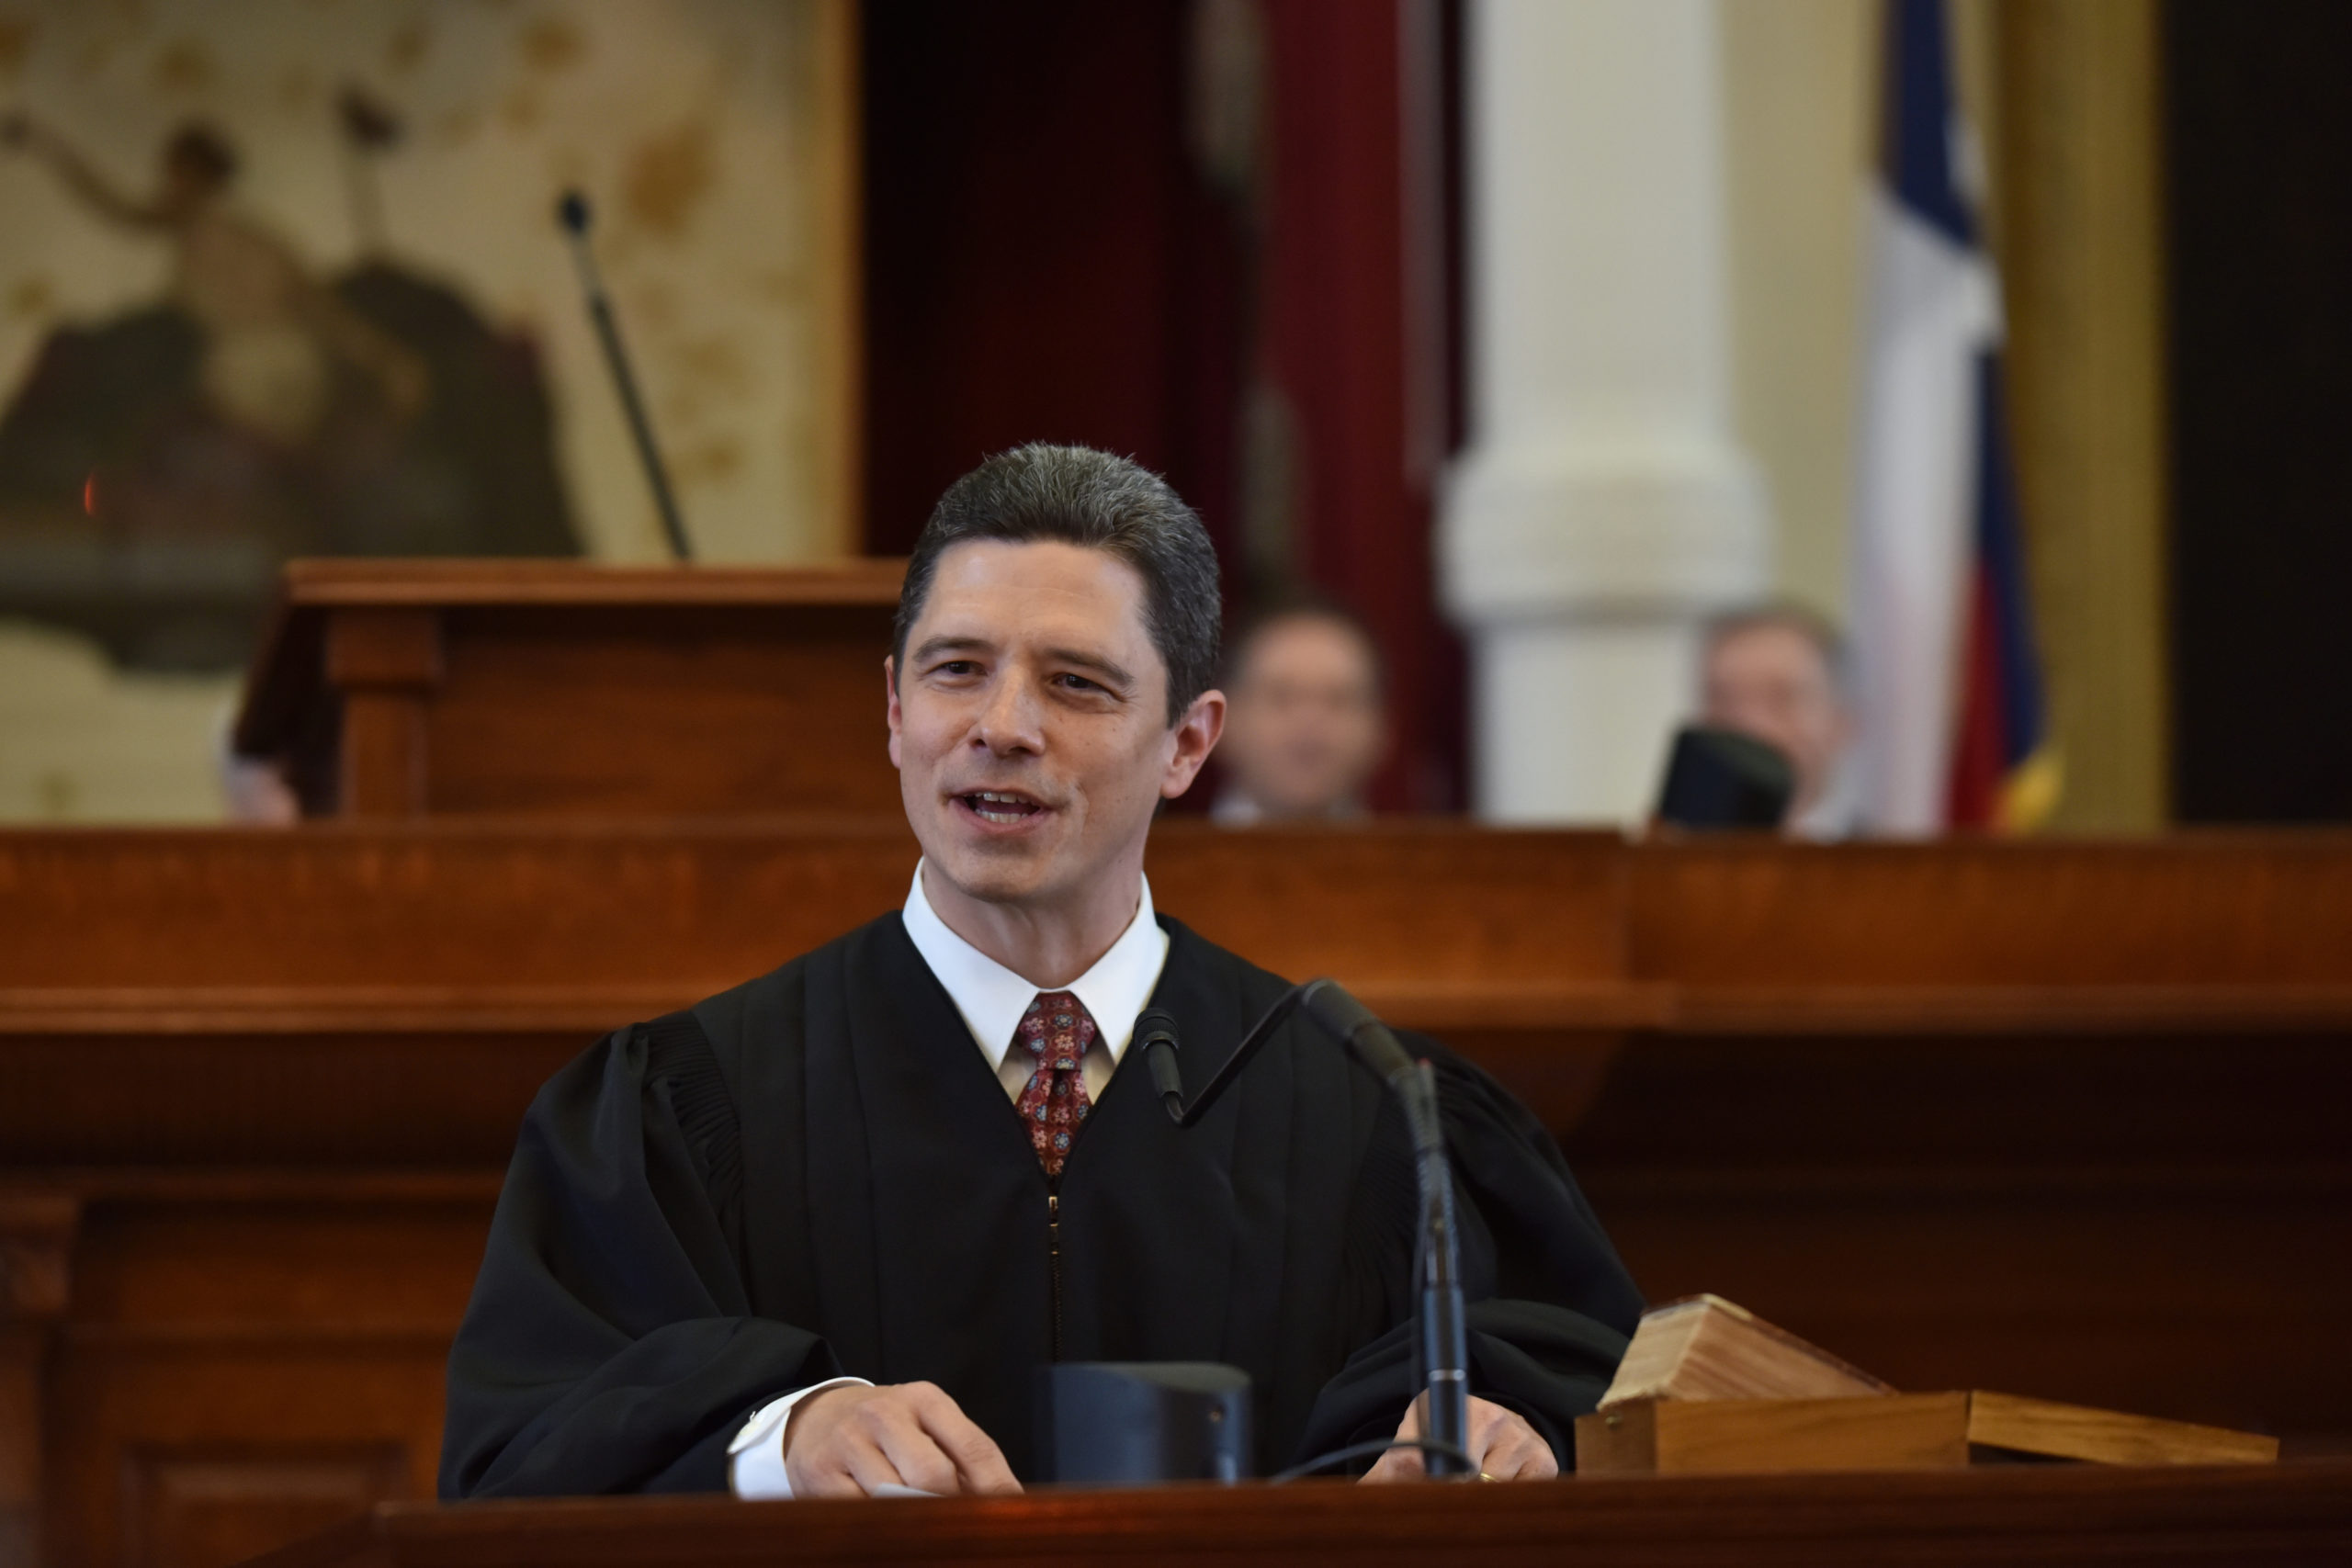 Justice Brett Busby Wins Texas Lawyer Poll for Supreme Court Place 8